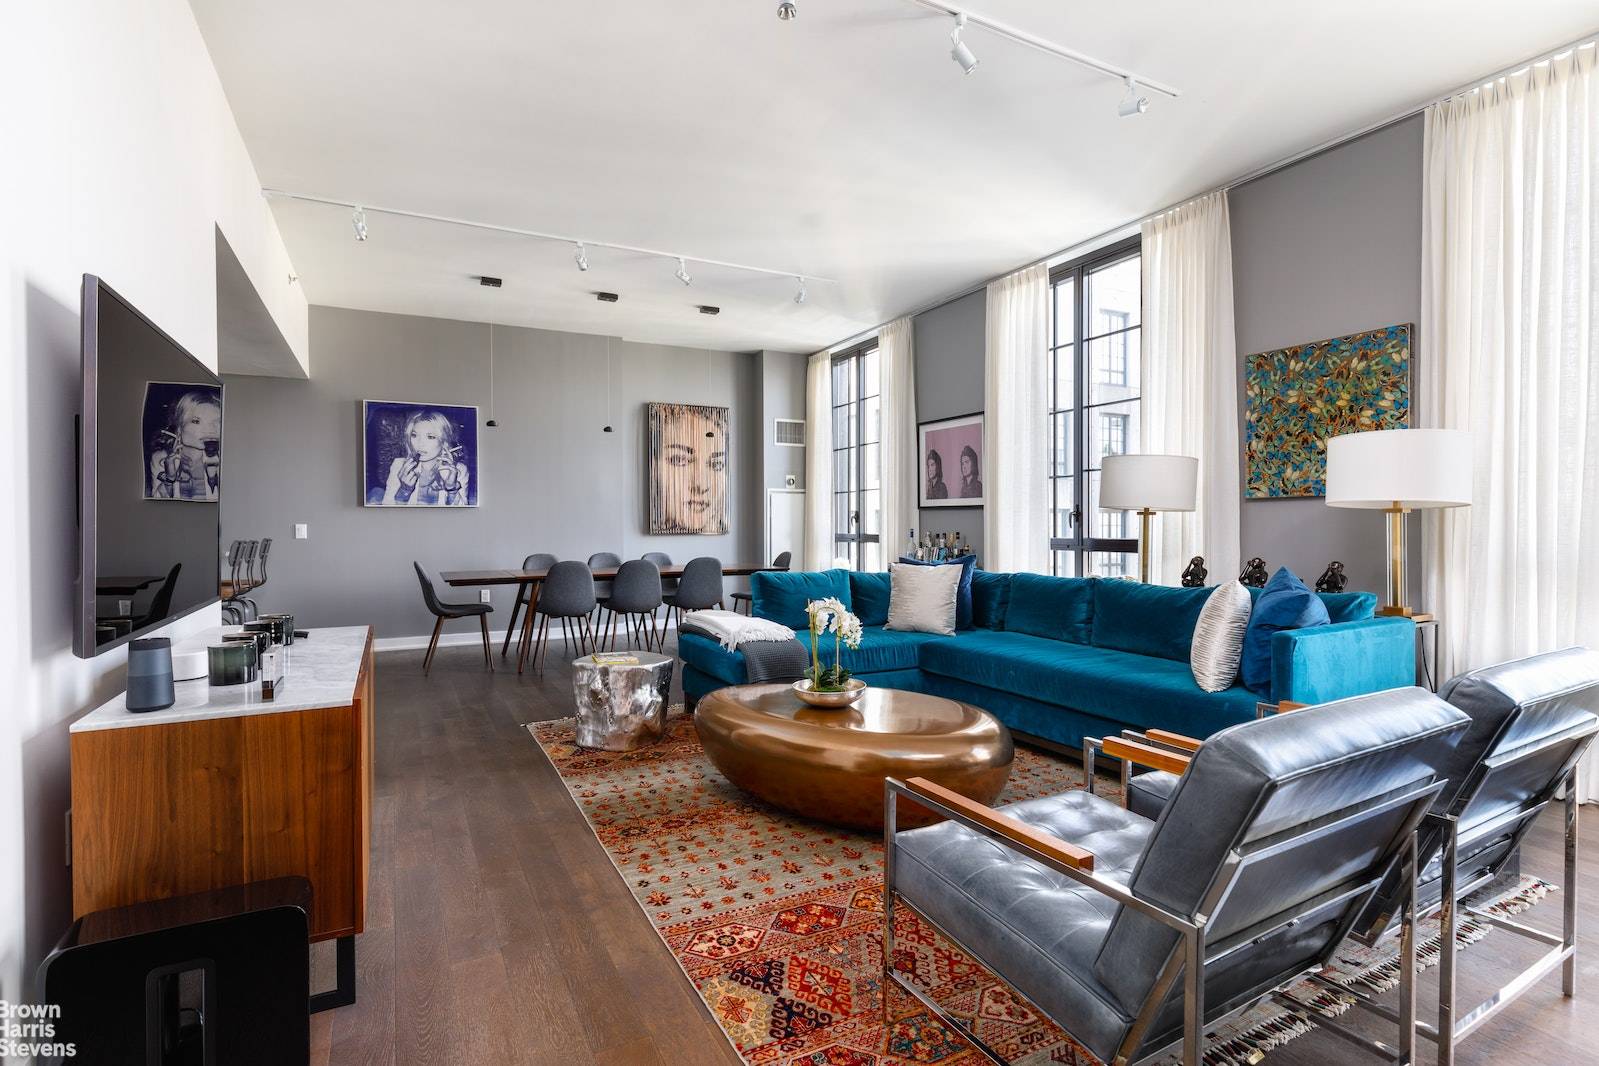 DUMBO PENTHOUSE DUPLEX WITH PRIVATE ROOF TERRACEAmazement will be your reaction when you enter this stunning penthouse duplex with an almost 30' wide loft like living space.